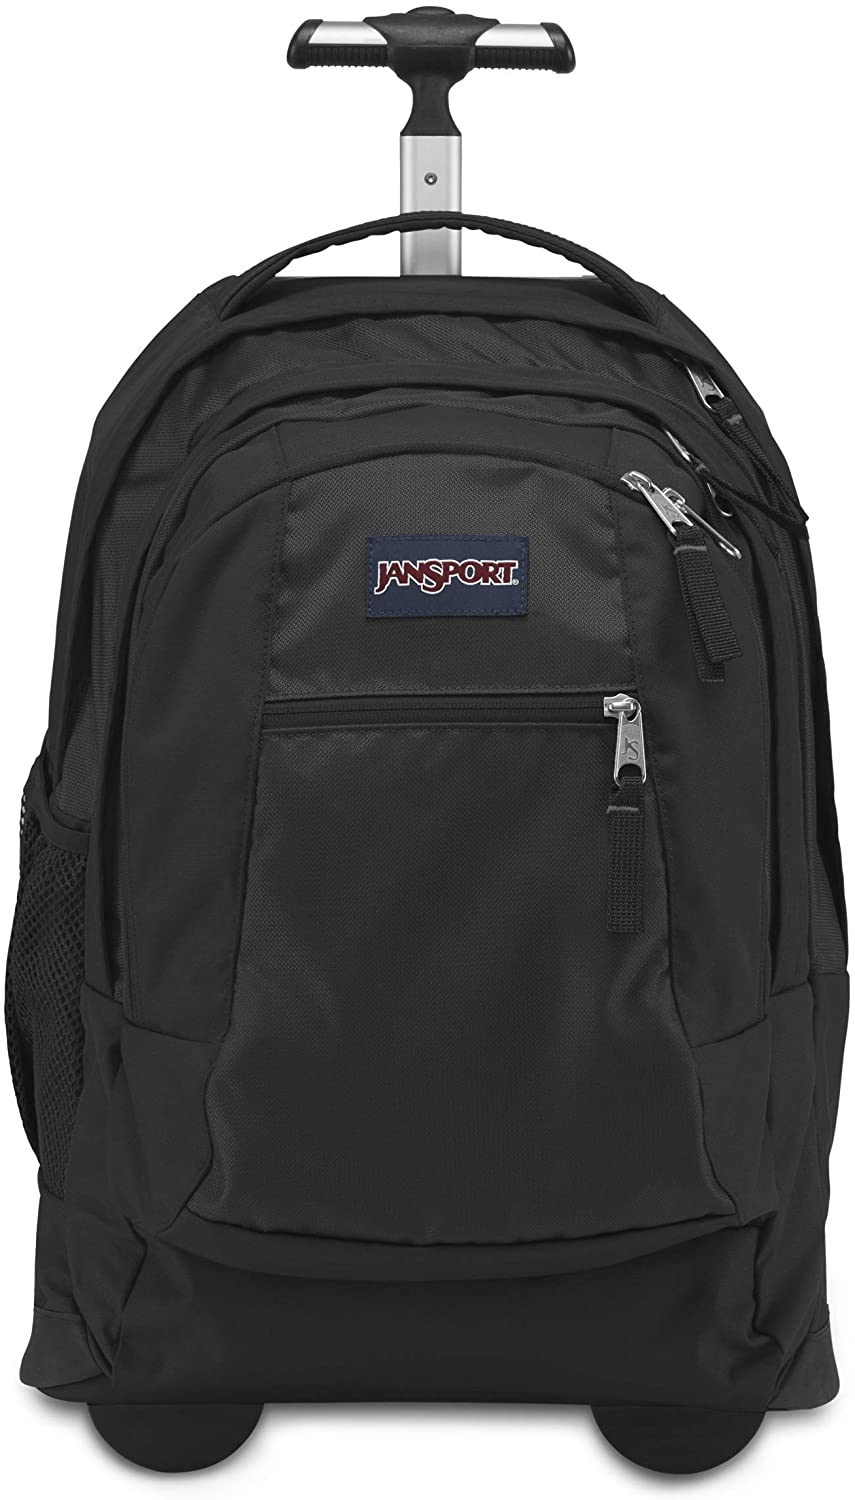 <strong>6. JanSport Driver 8 Rolling Backpack</strong>